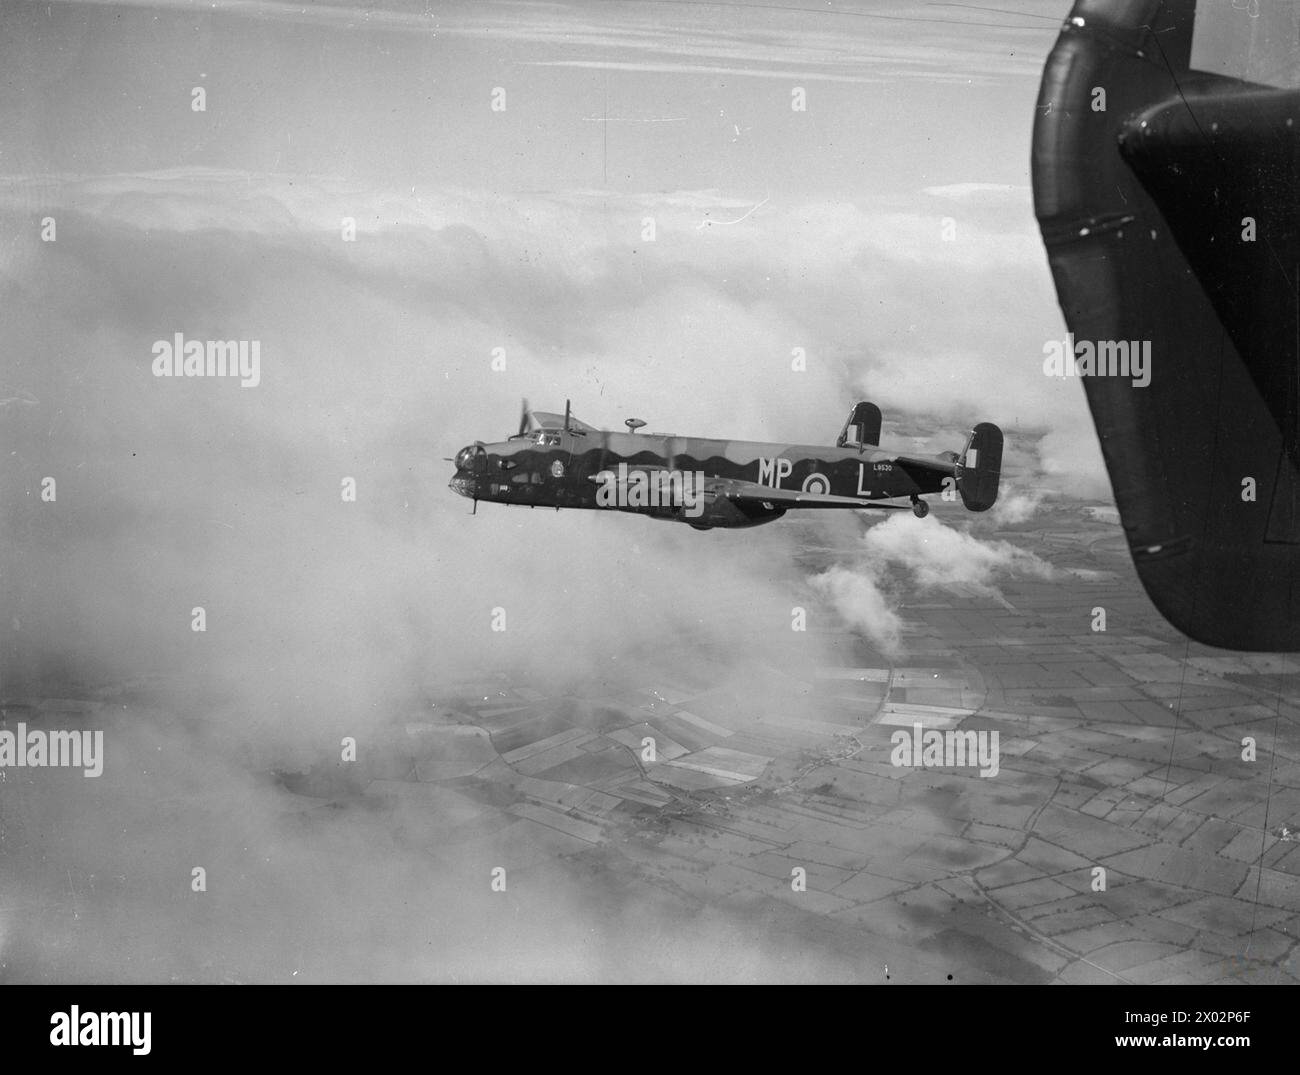 AIRCRAFT OF THE ROYAL AIR FORCE 1939-1945: HANDLEY PAGE HP.57 HALIFAX. - Halifax Mark I Series 1, L9530 MP-L, of No 76 Squadron RAF based at Middleton-St-George, County Durham, in flight  Royal Air Force, Royal Air Force Regiment, Sqdn, 76 Stock Photo